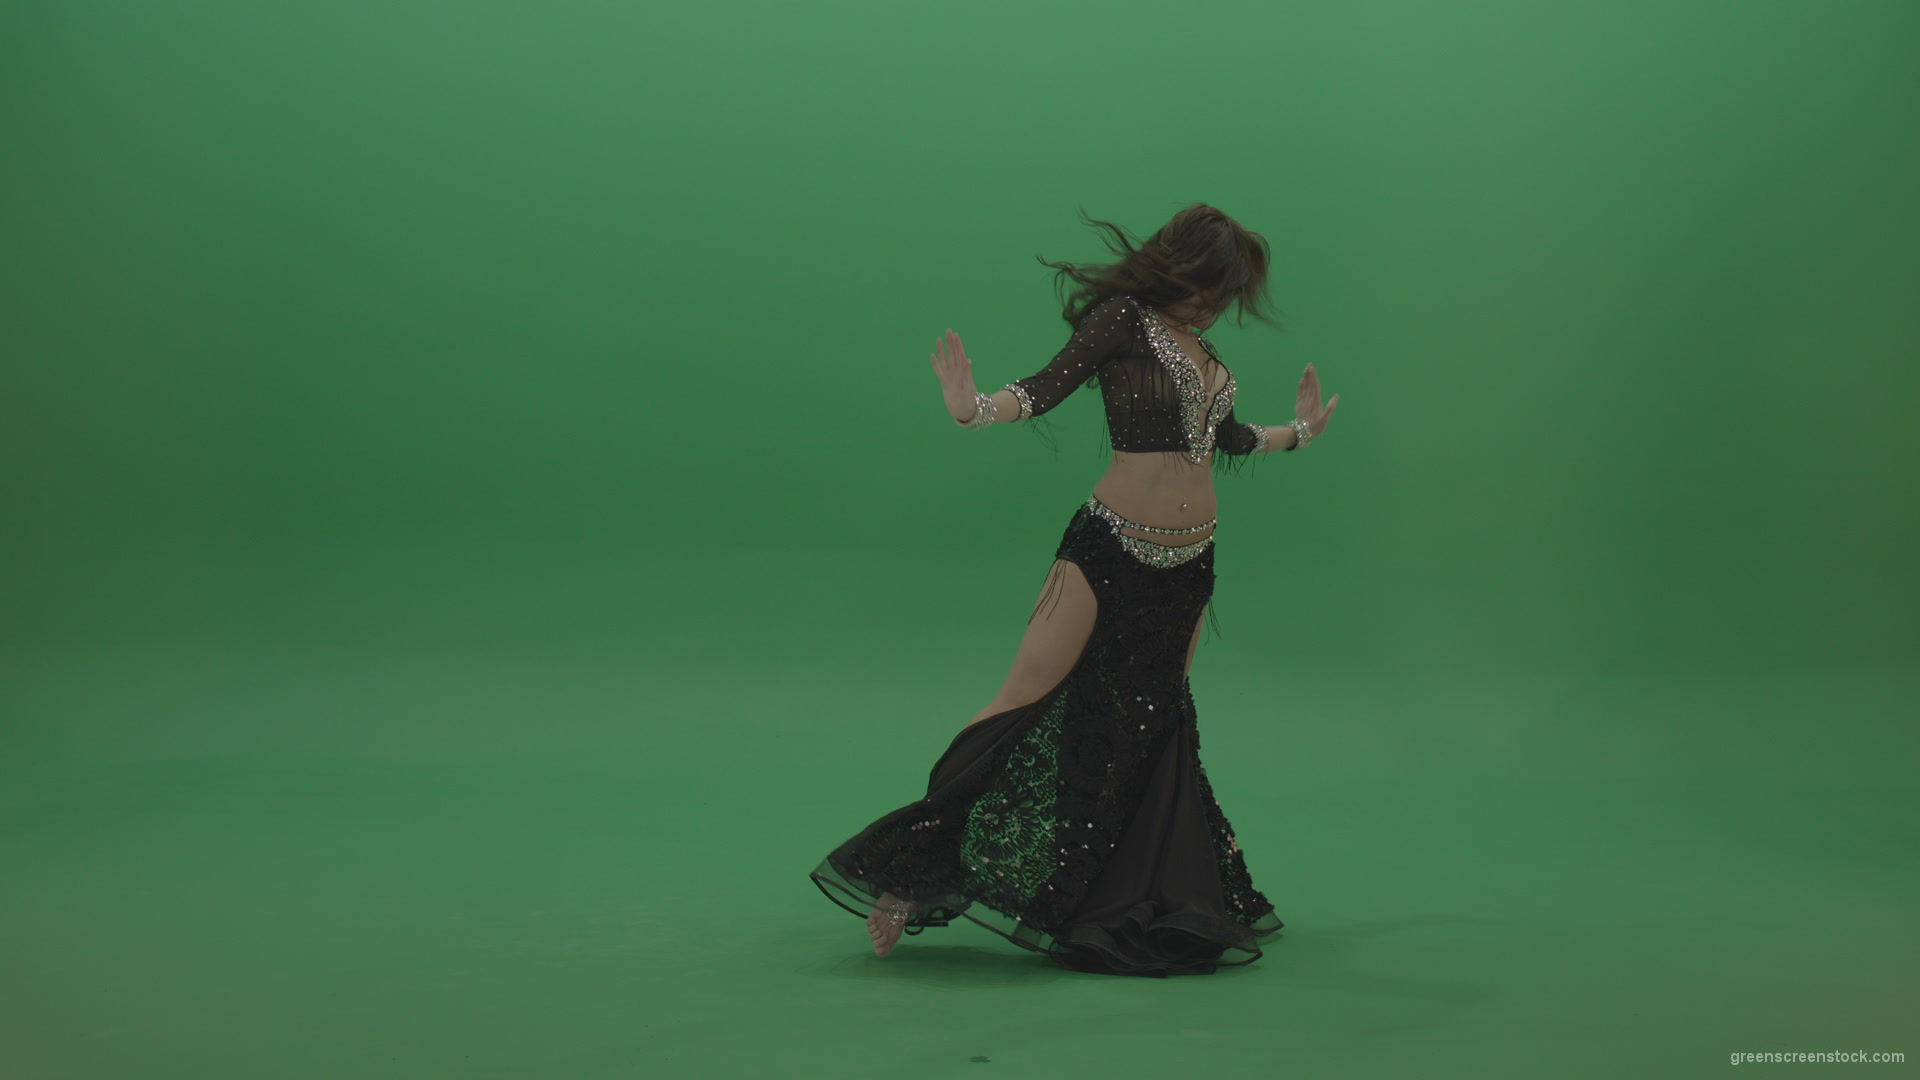 Appealing-belly-dancer-in-black-wear-display-amazing-dance-moves-over-chromakey-background_009 Green Screen Stock